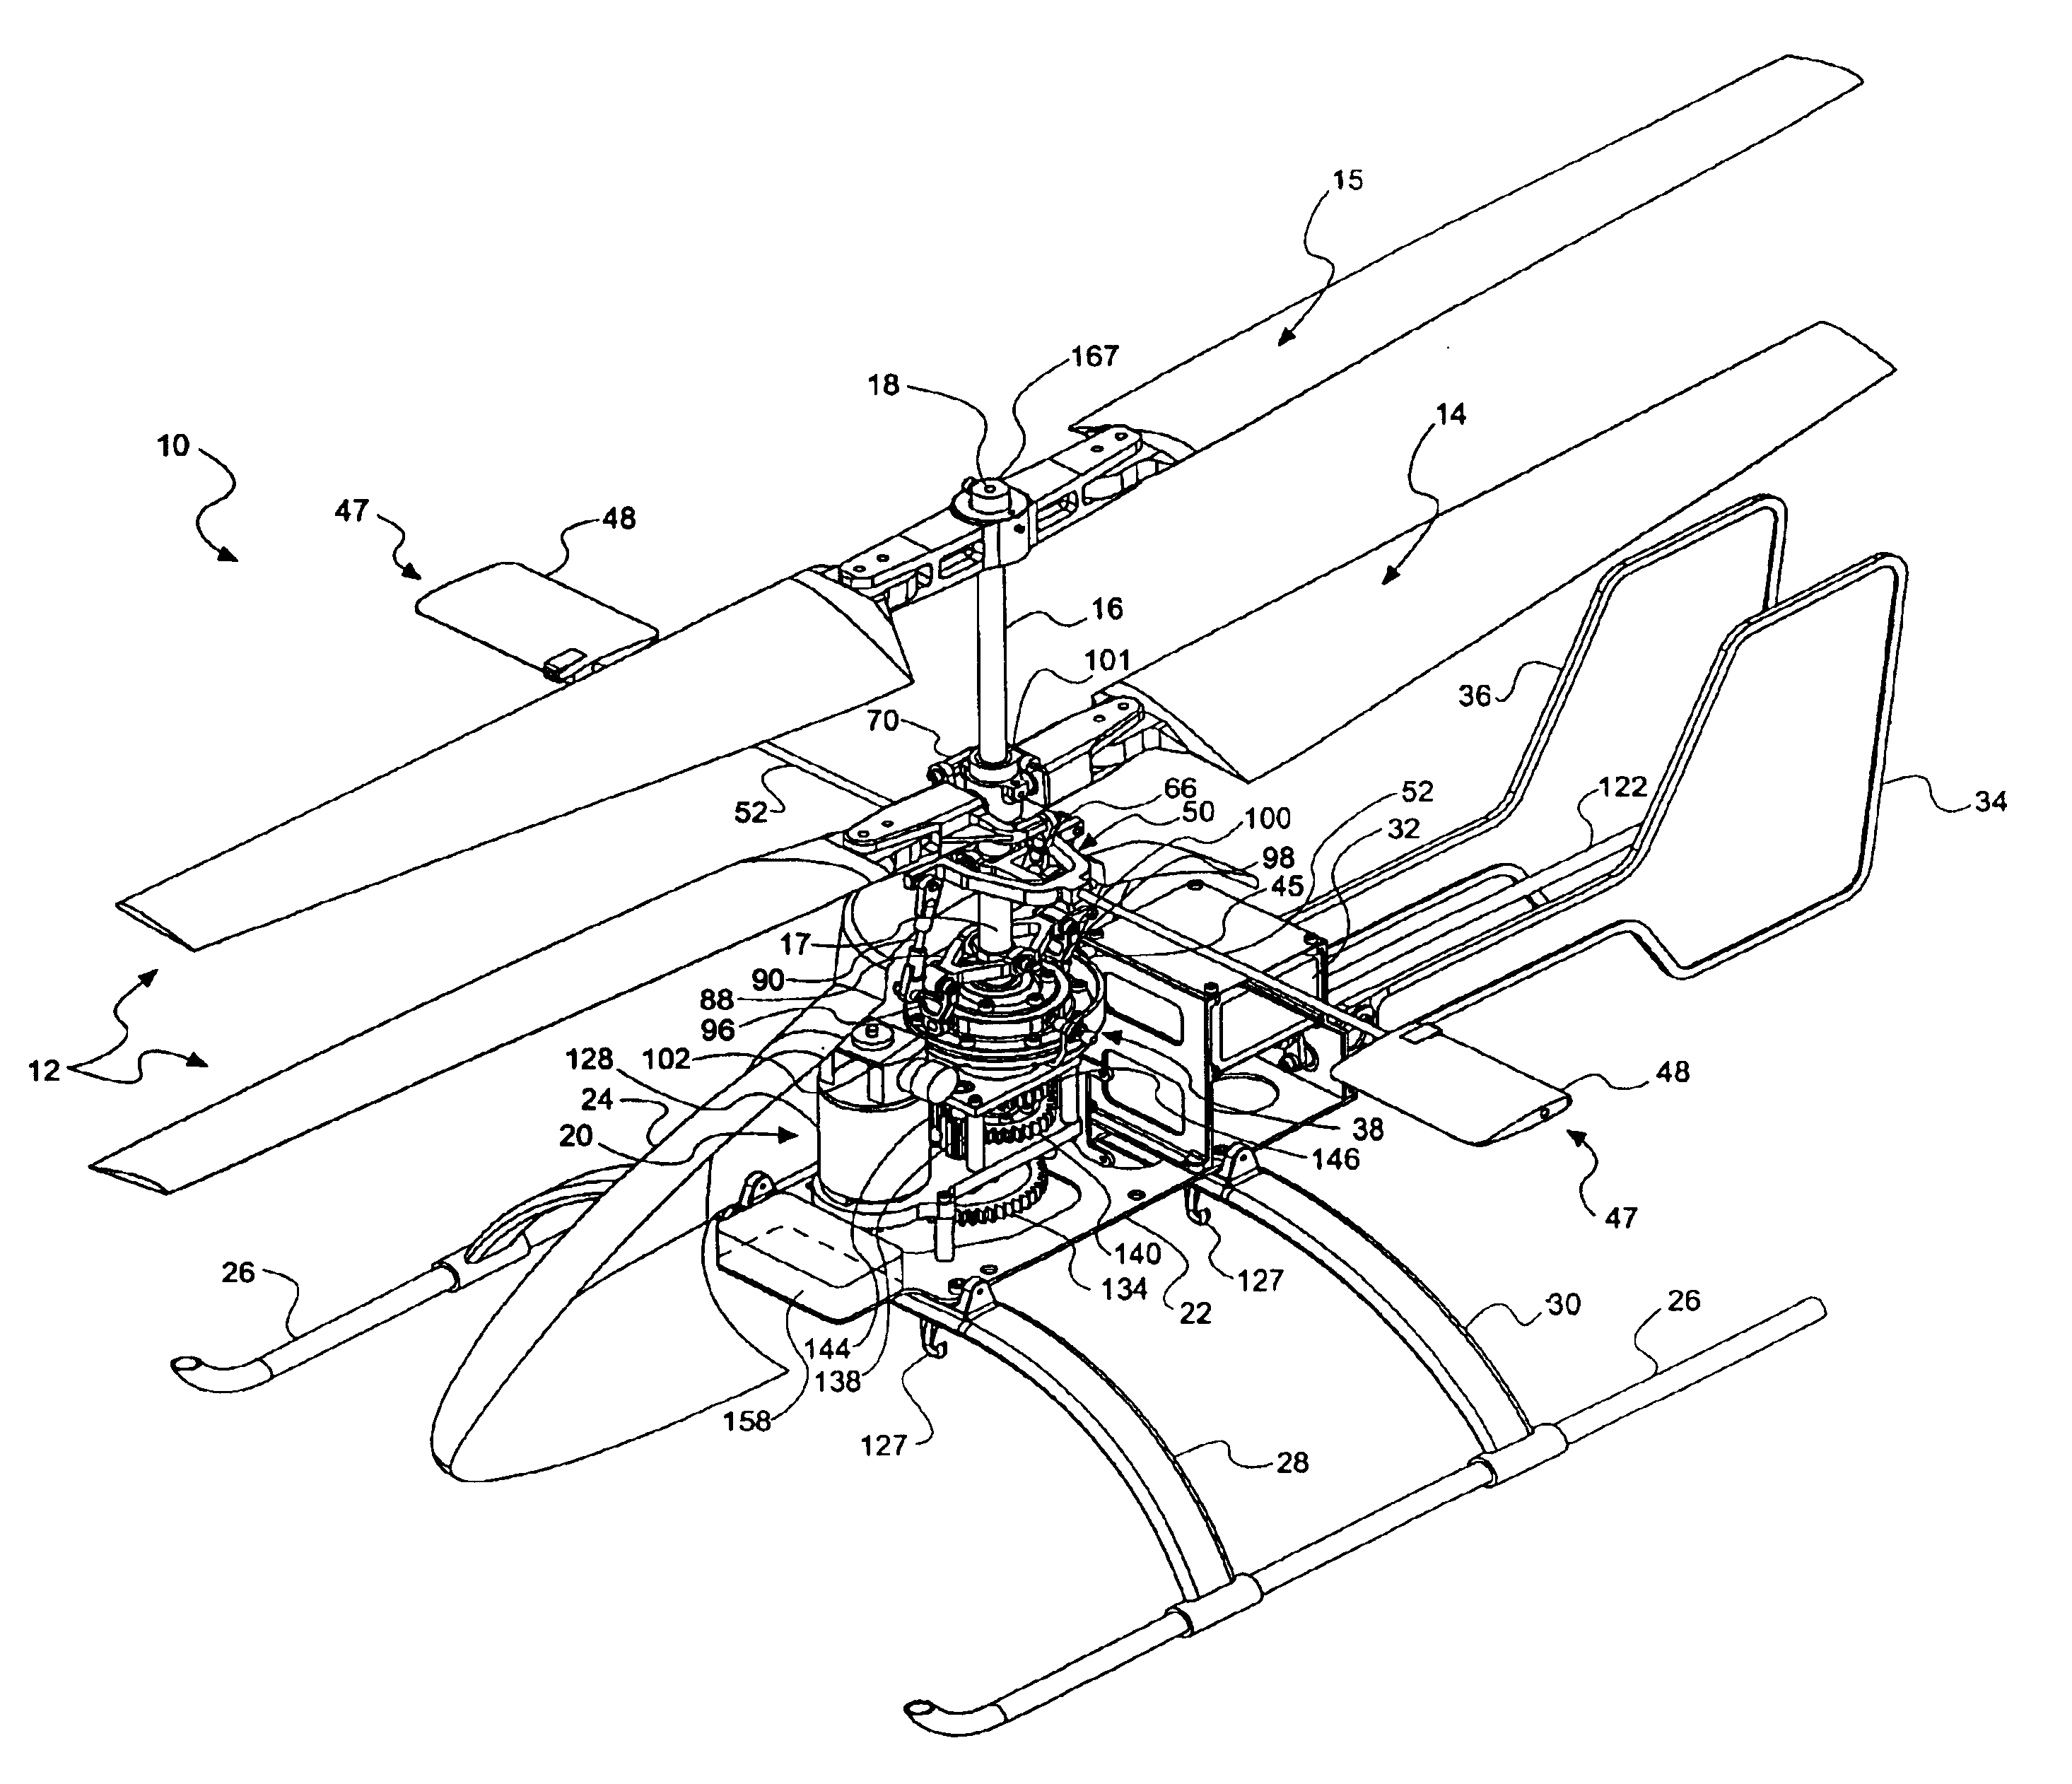 Coaxial helicopter